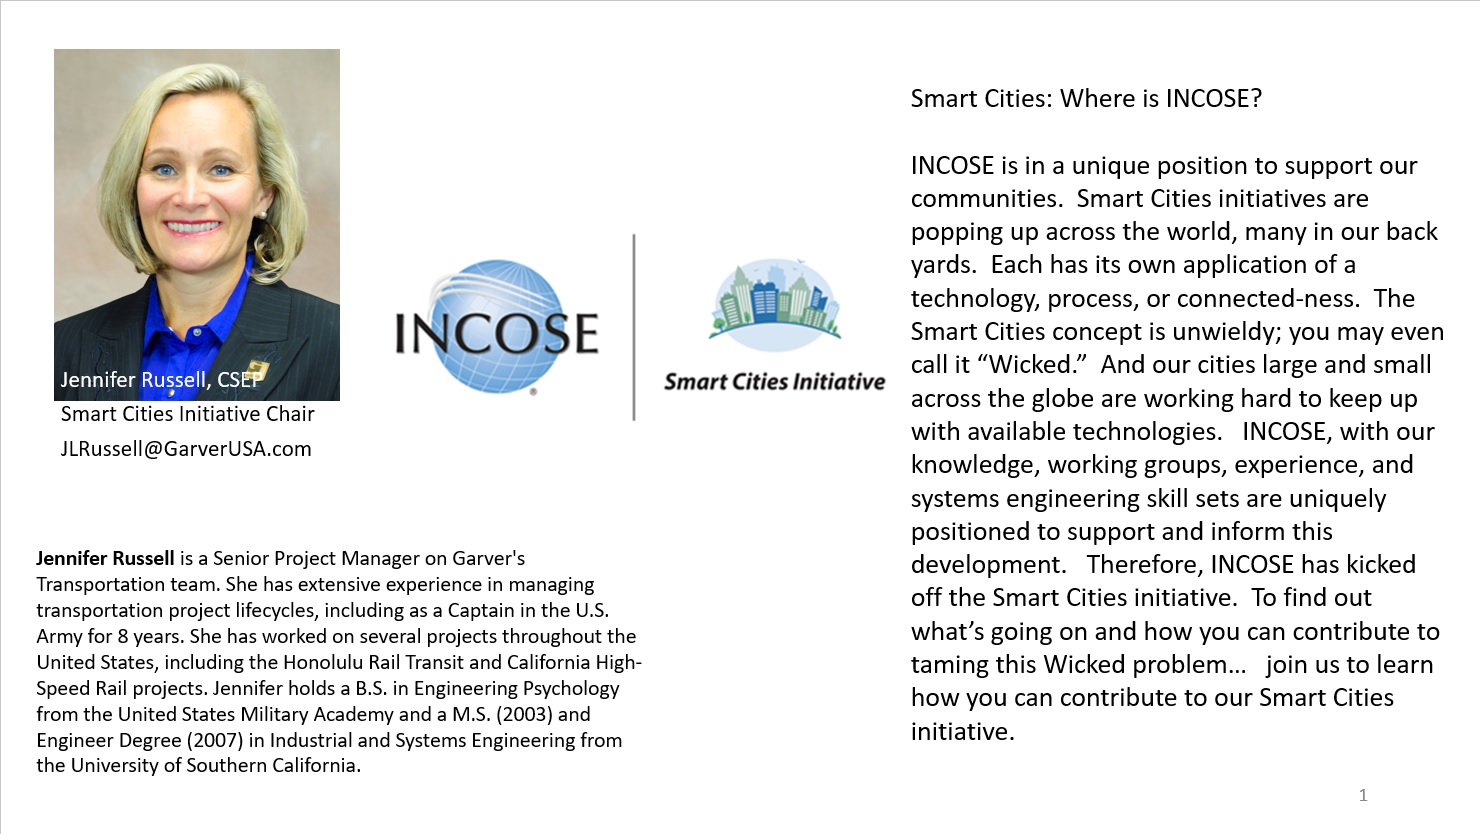 Abstract - Smart Cities: Where is INCOSE?